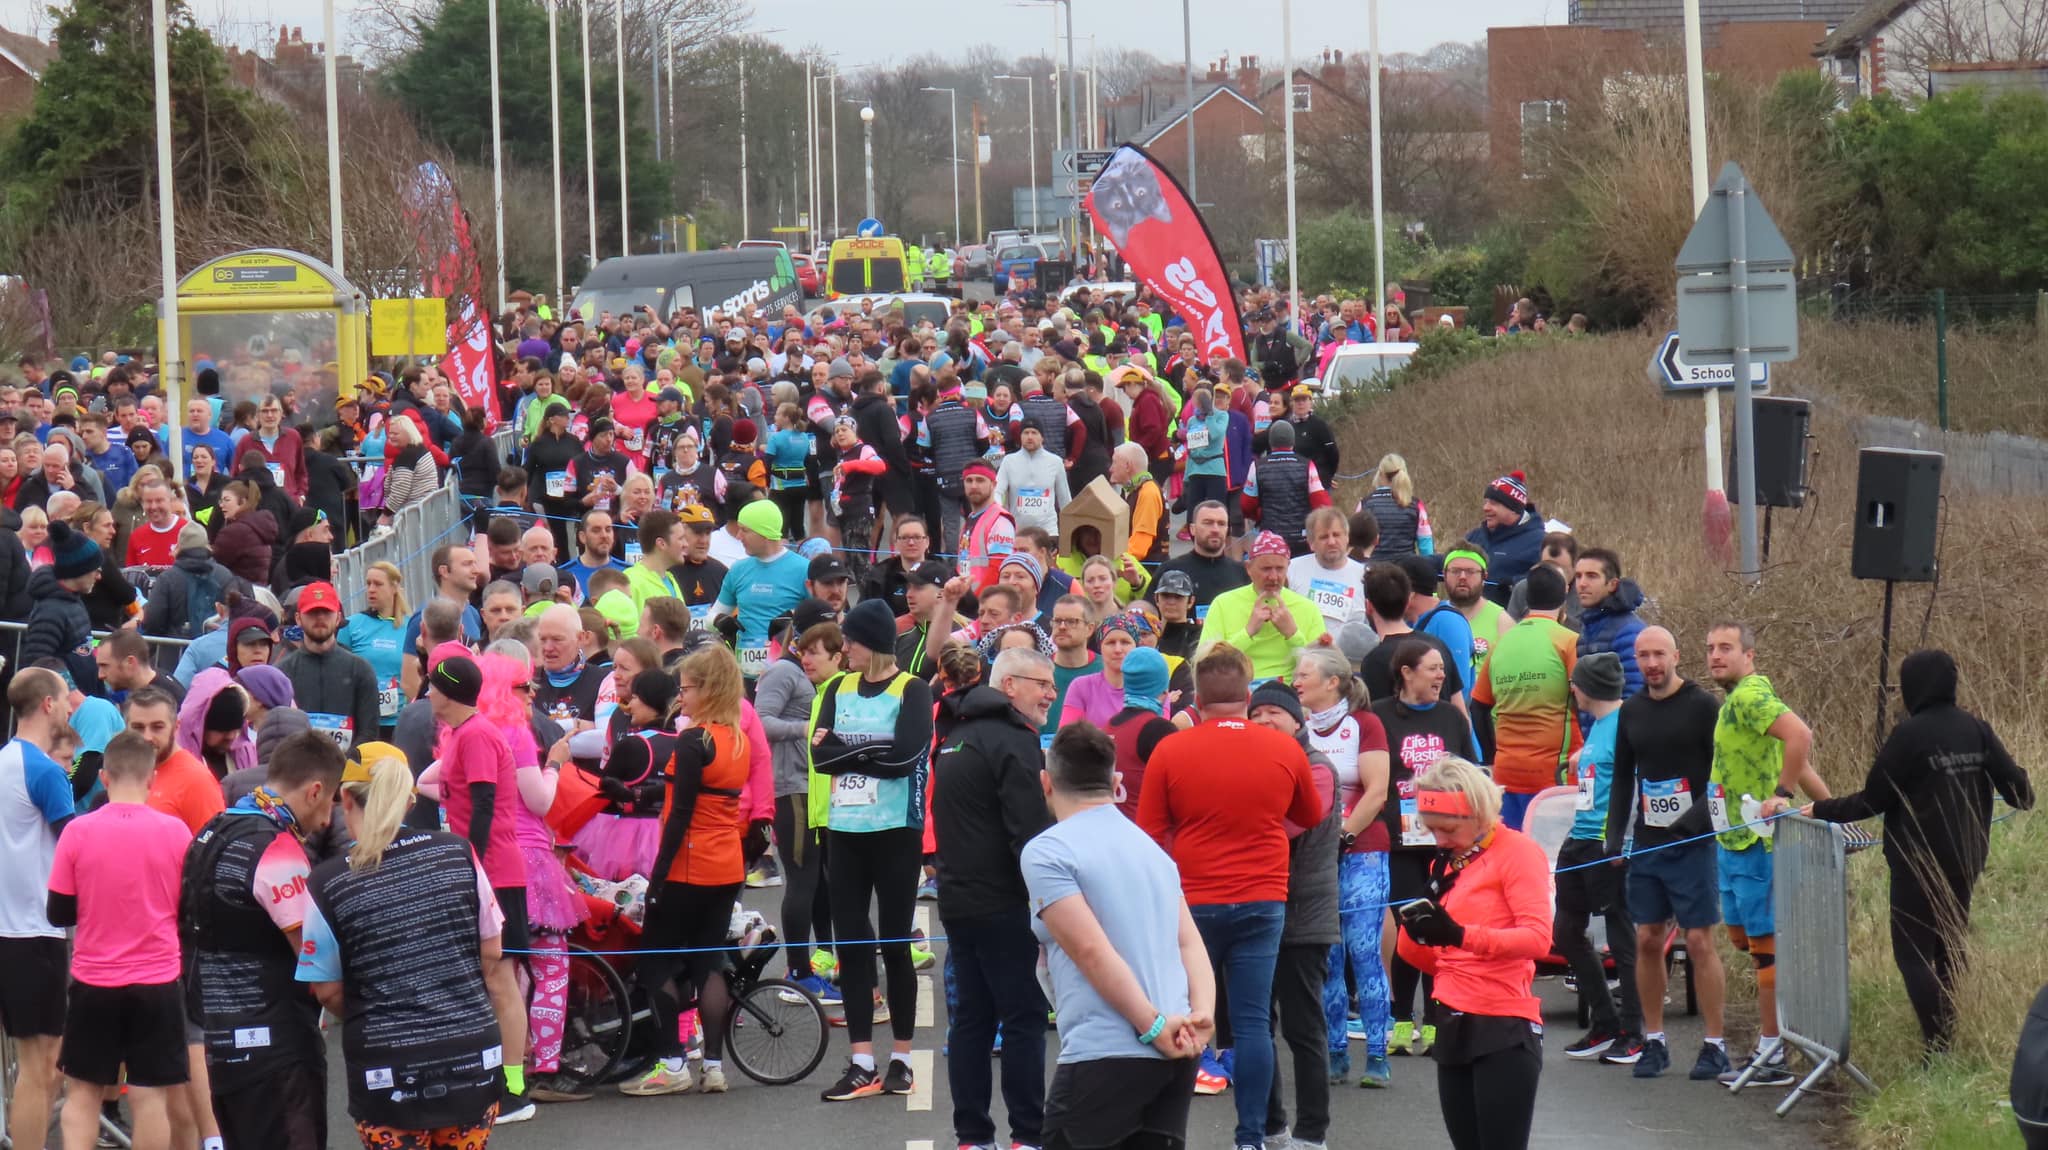 Hundreds of runners enjoyed the Southport Mad Dog 10lk run sponsored by Jollyes - The Pet People. 